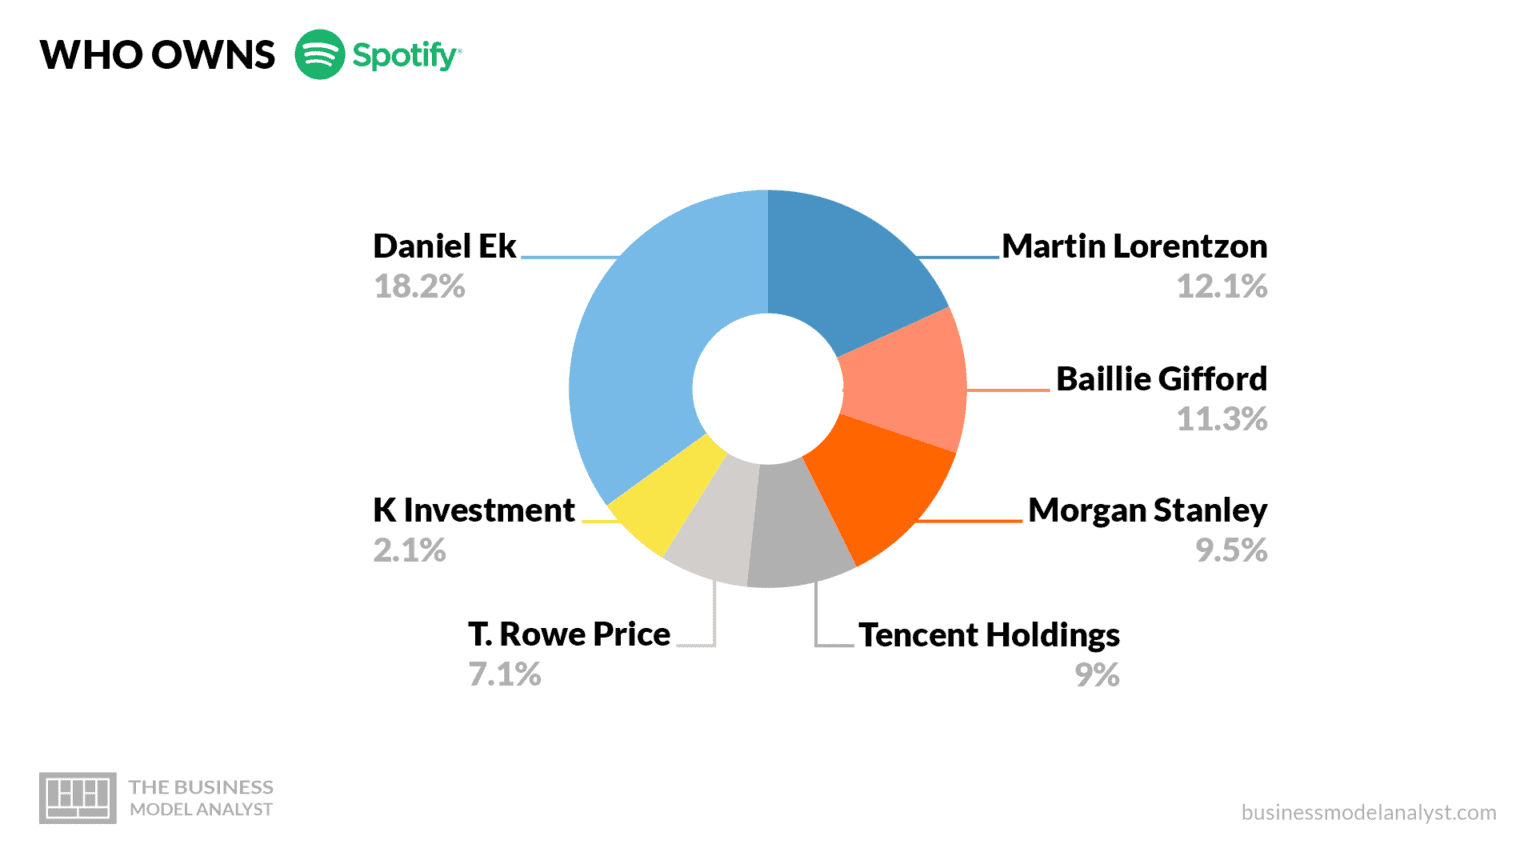 Who owns the Spotify?